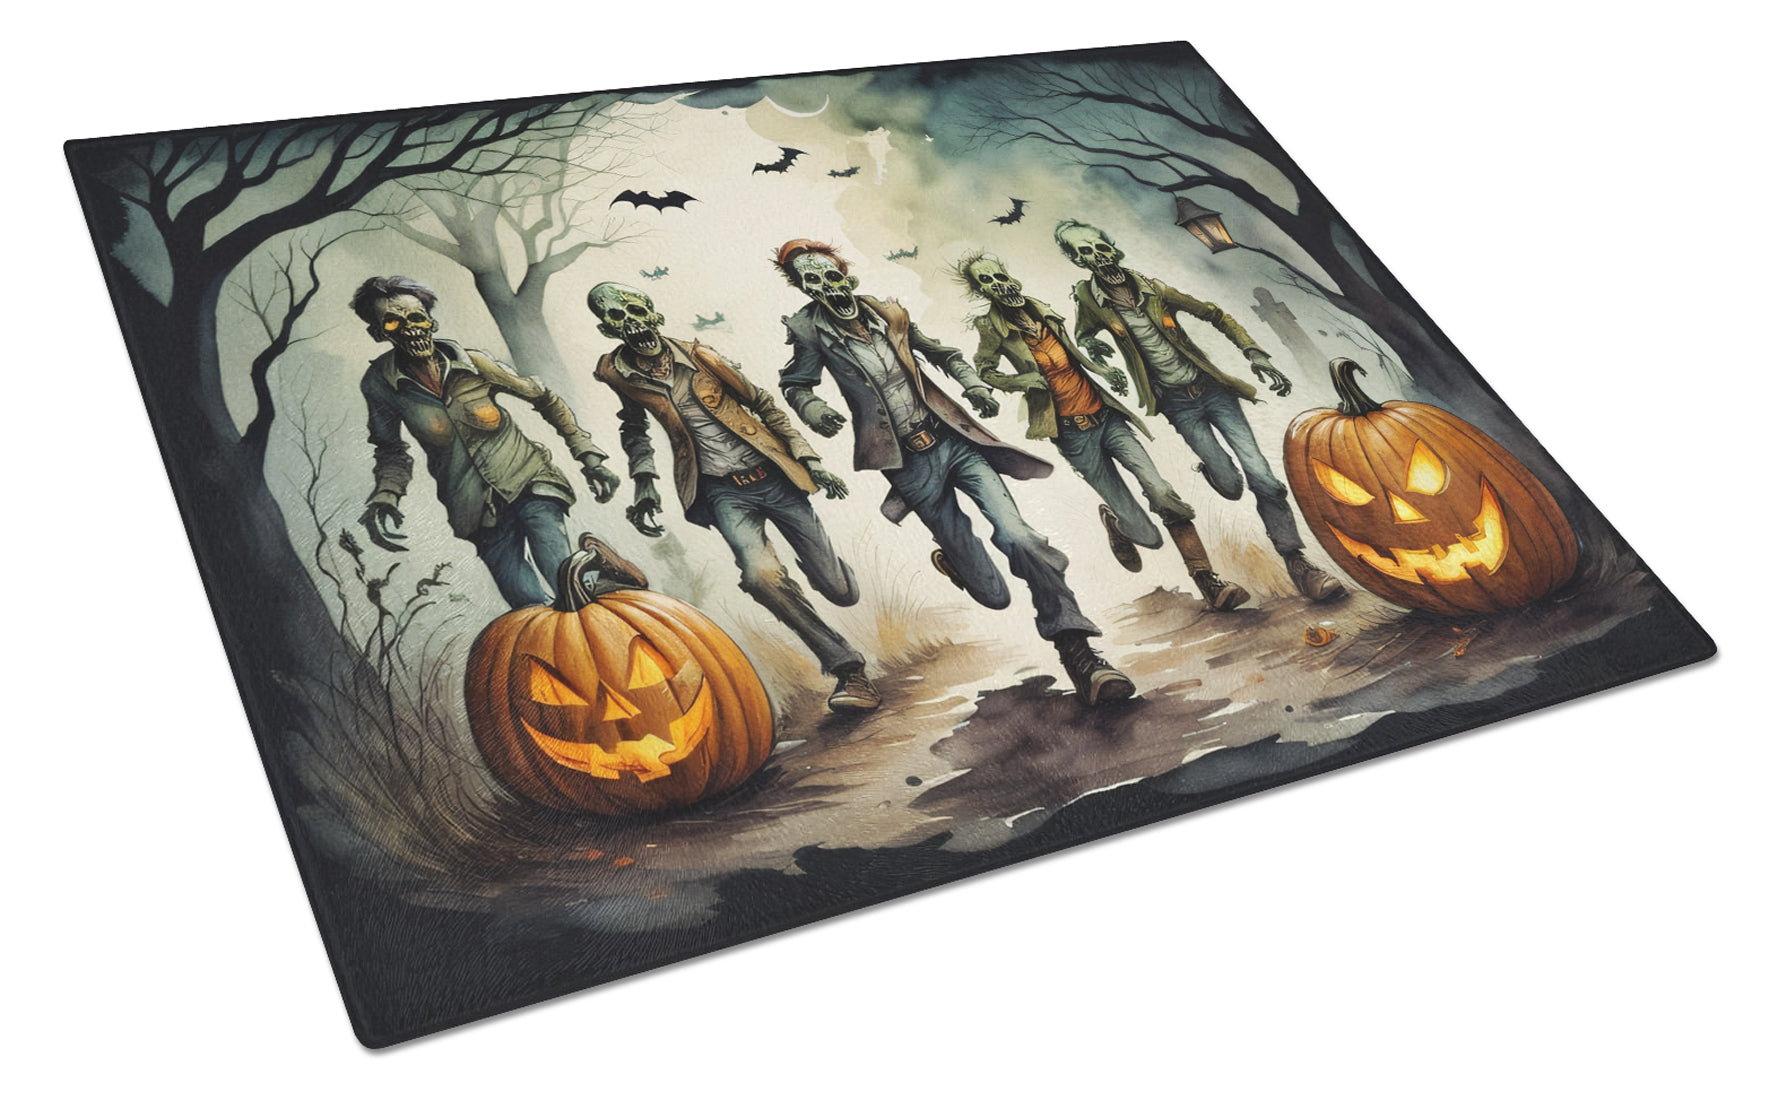 Buy this Zombies Spooky Halloween Glass Cutting Board Large